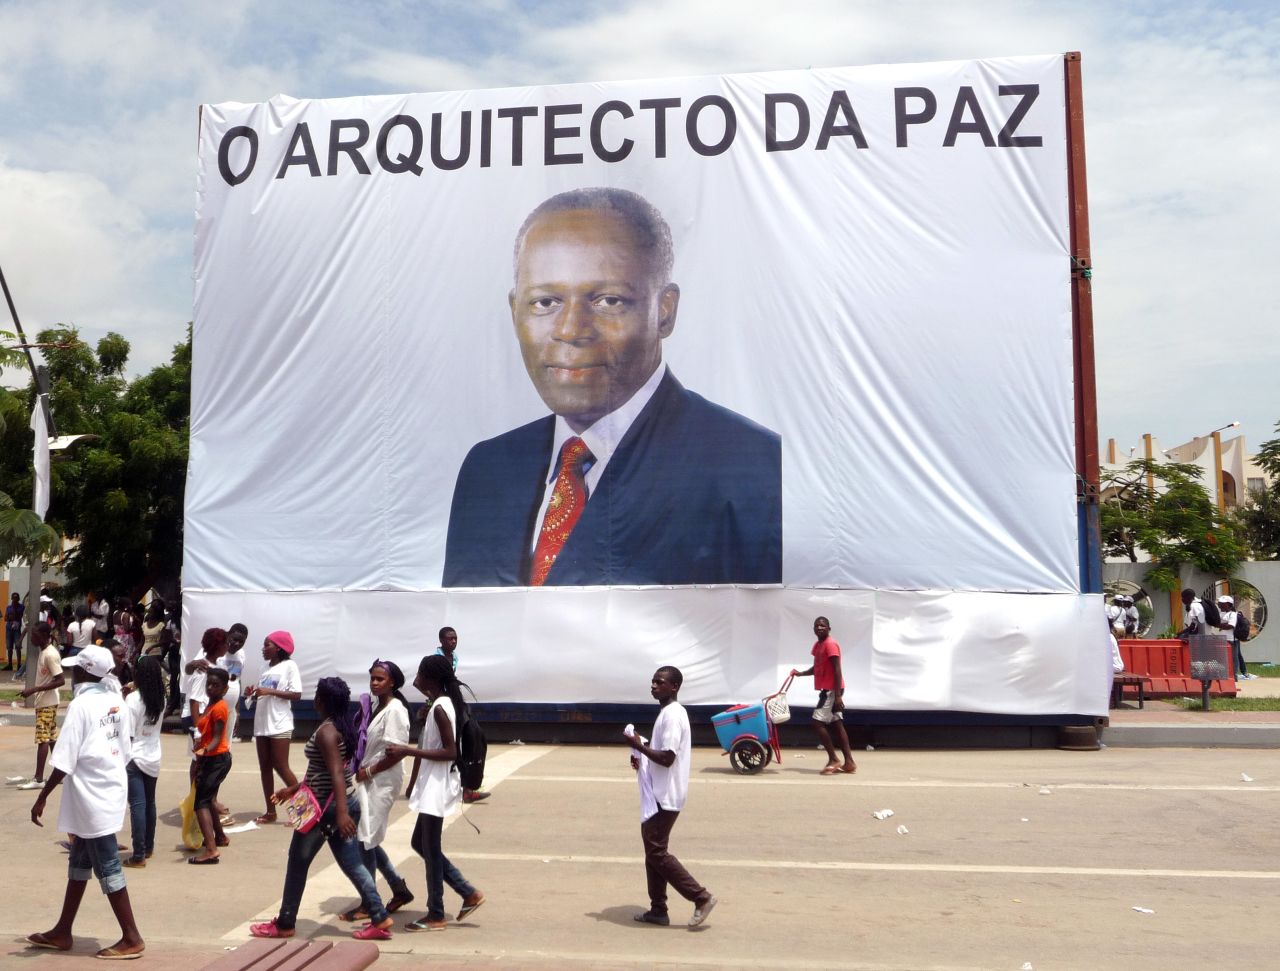 Earlier this year, Angola celebrated 10 years of the end of its civil war. Here, Luanda residents walk in front of a giant portrait of President  dos Santos, with text reading "The Architect of Peace" on April 4, 2012.